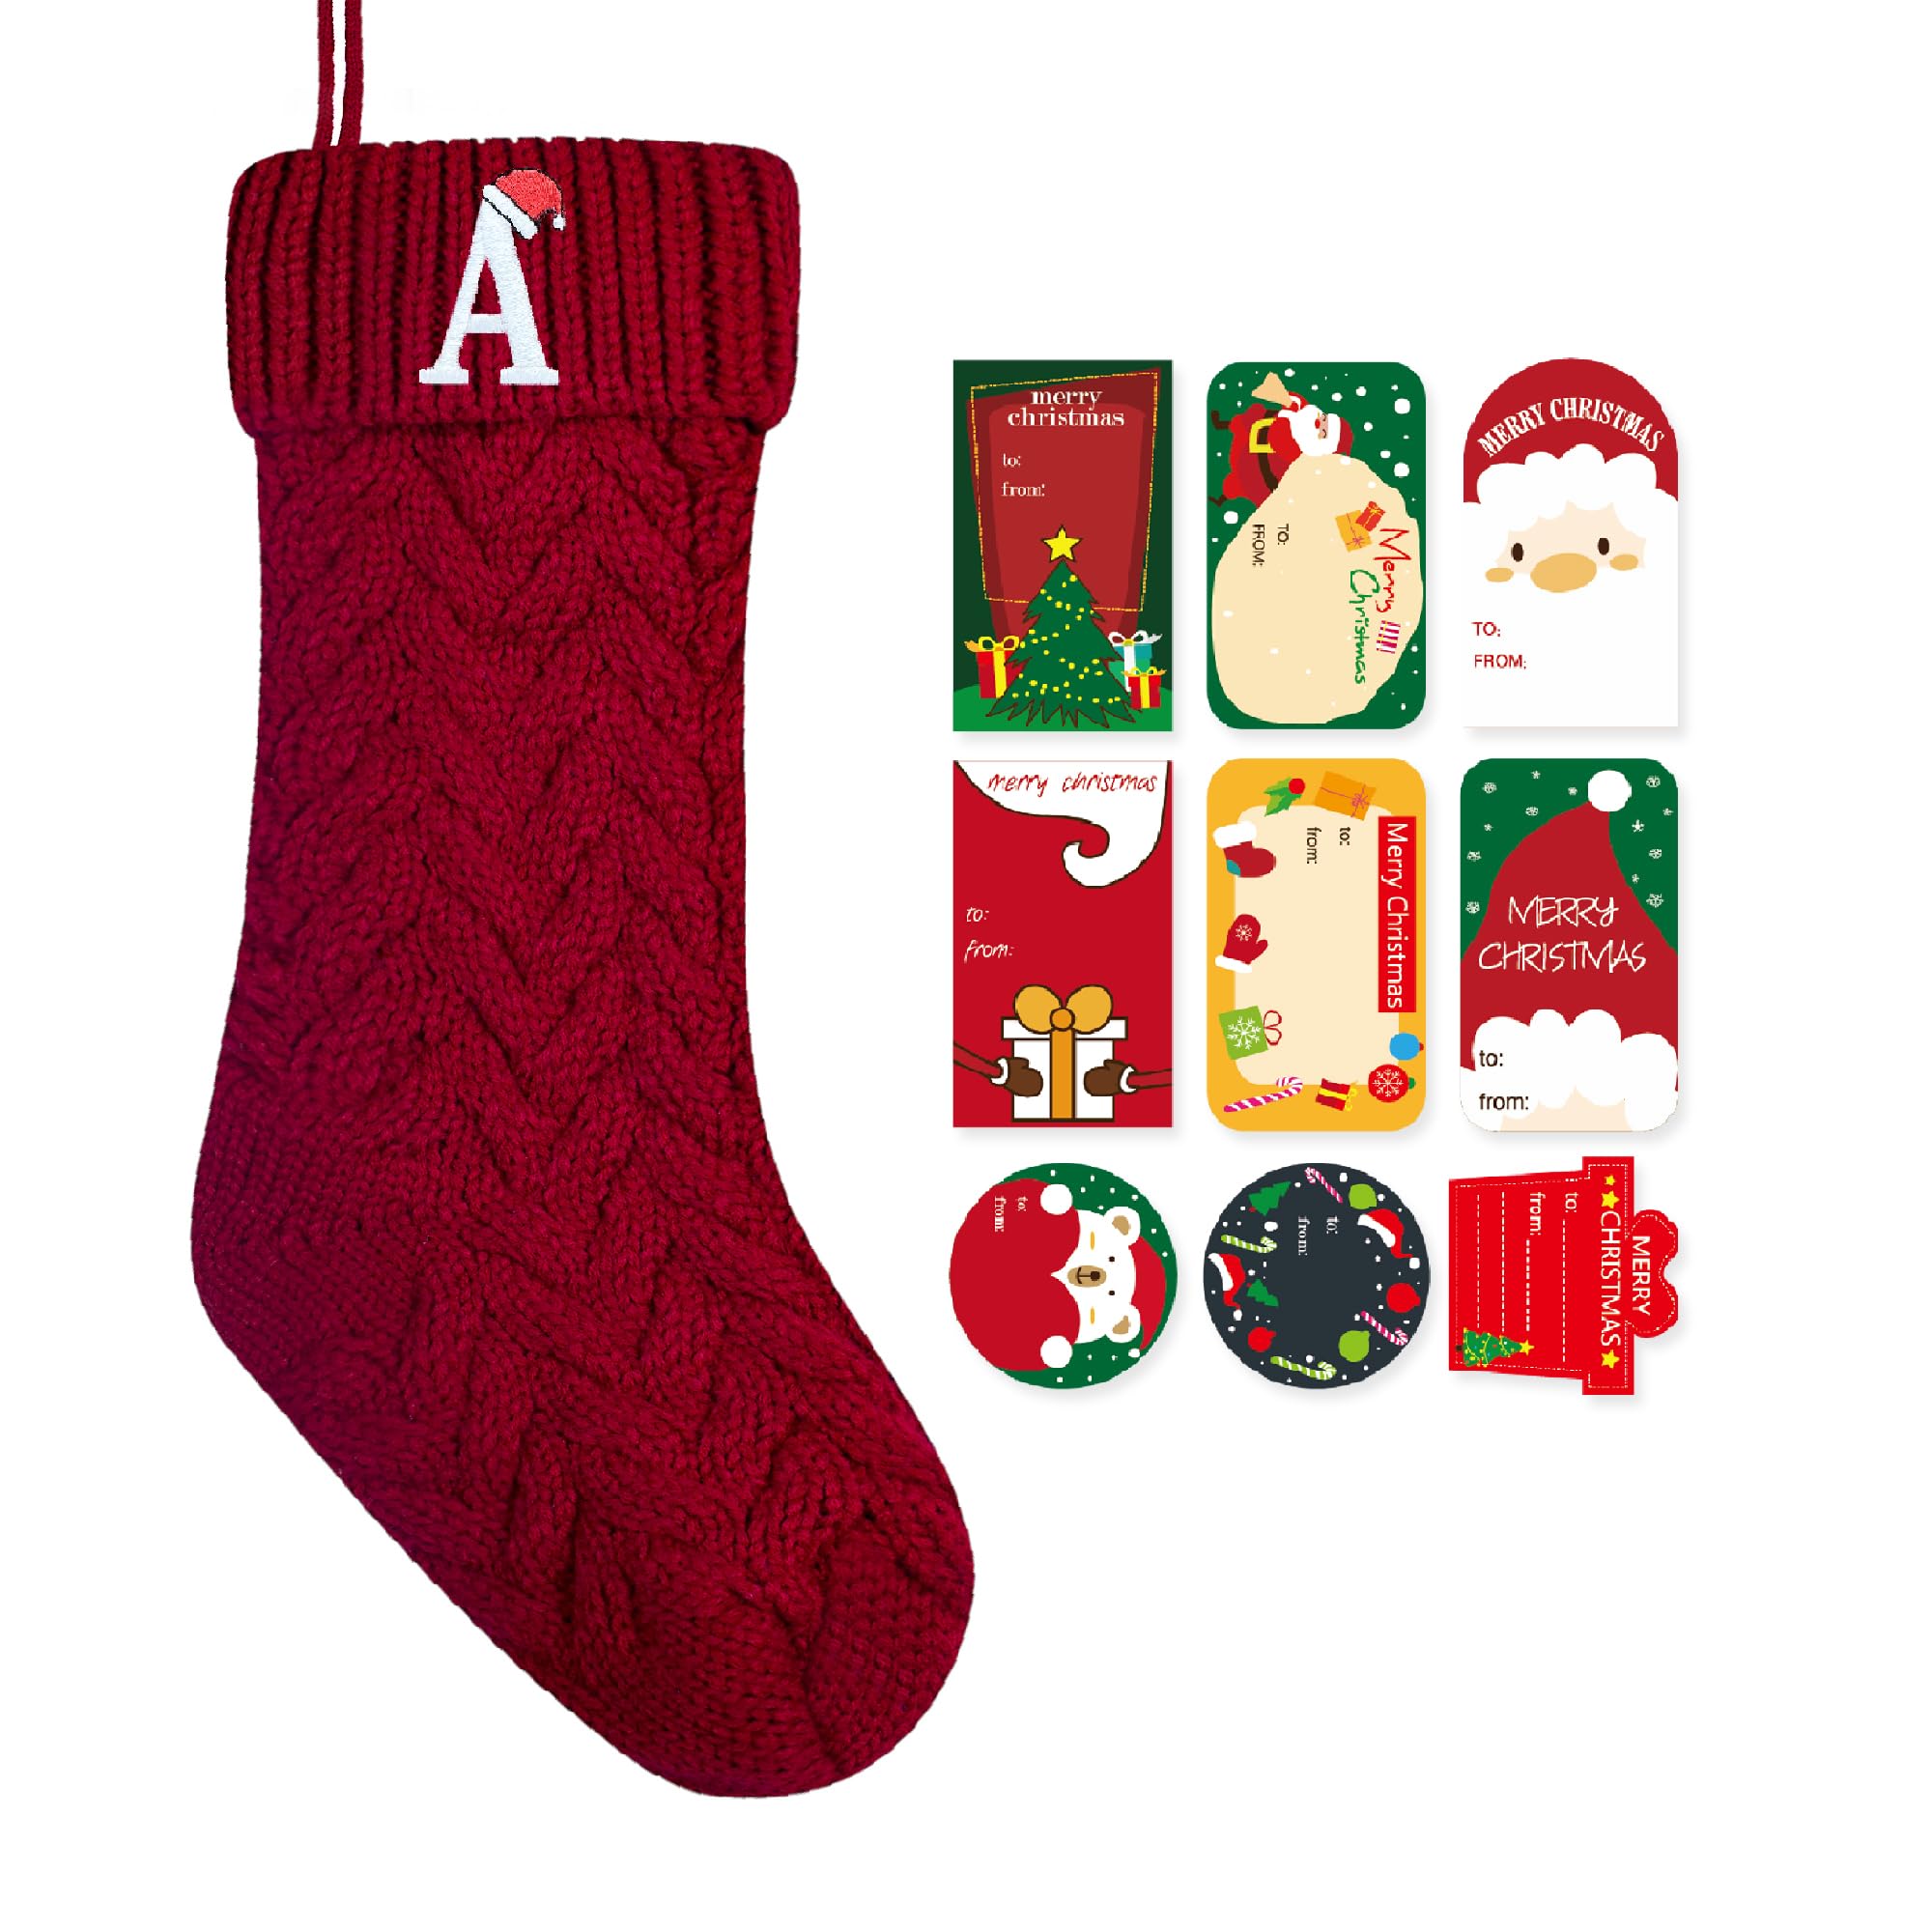 ZGCYSMHT Christmas Stockings Personalized Custom Initials 18 Inches Knitted Christmas Stockings with Letter Fireplace Hanging Monogram Xmas Stockings for Kids,Family Holiday Party Decoration（Red A）